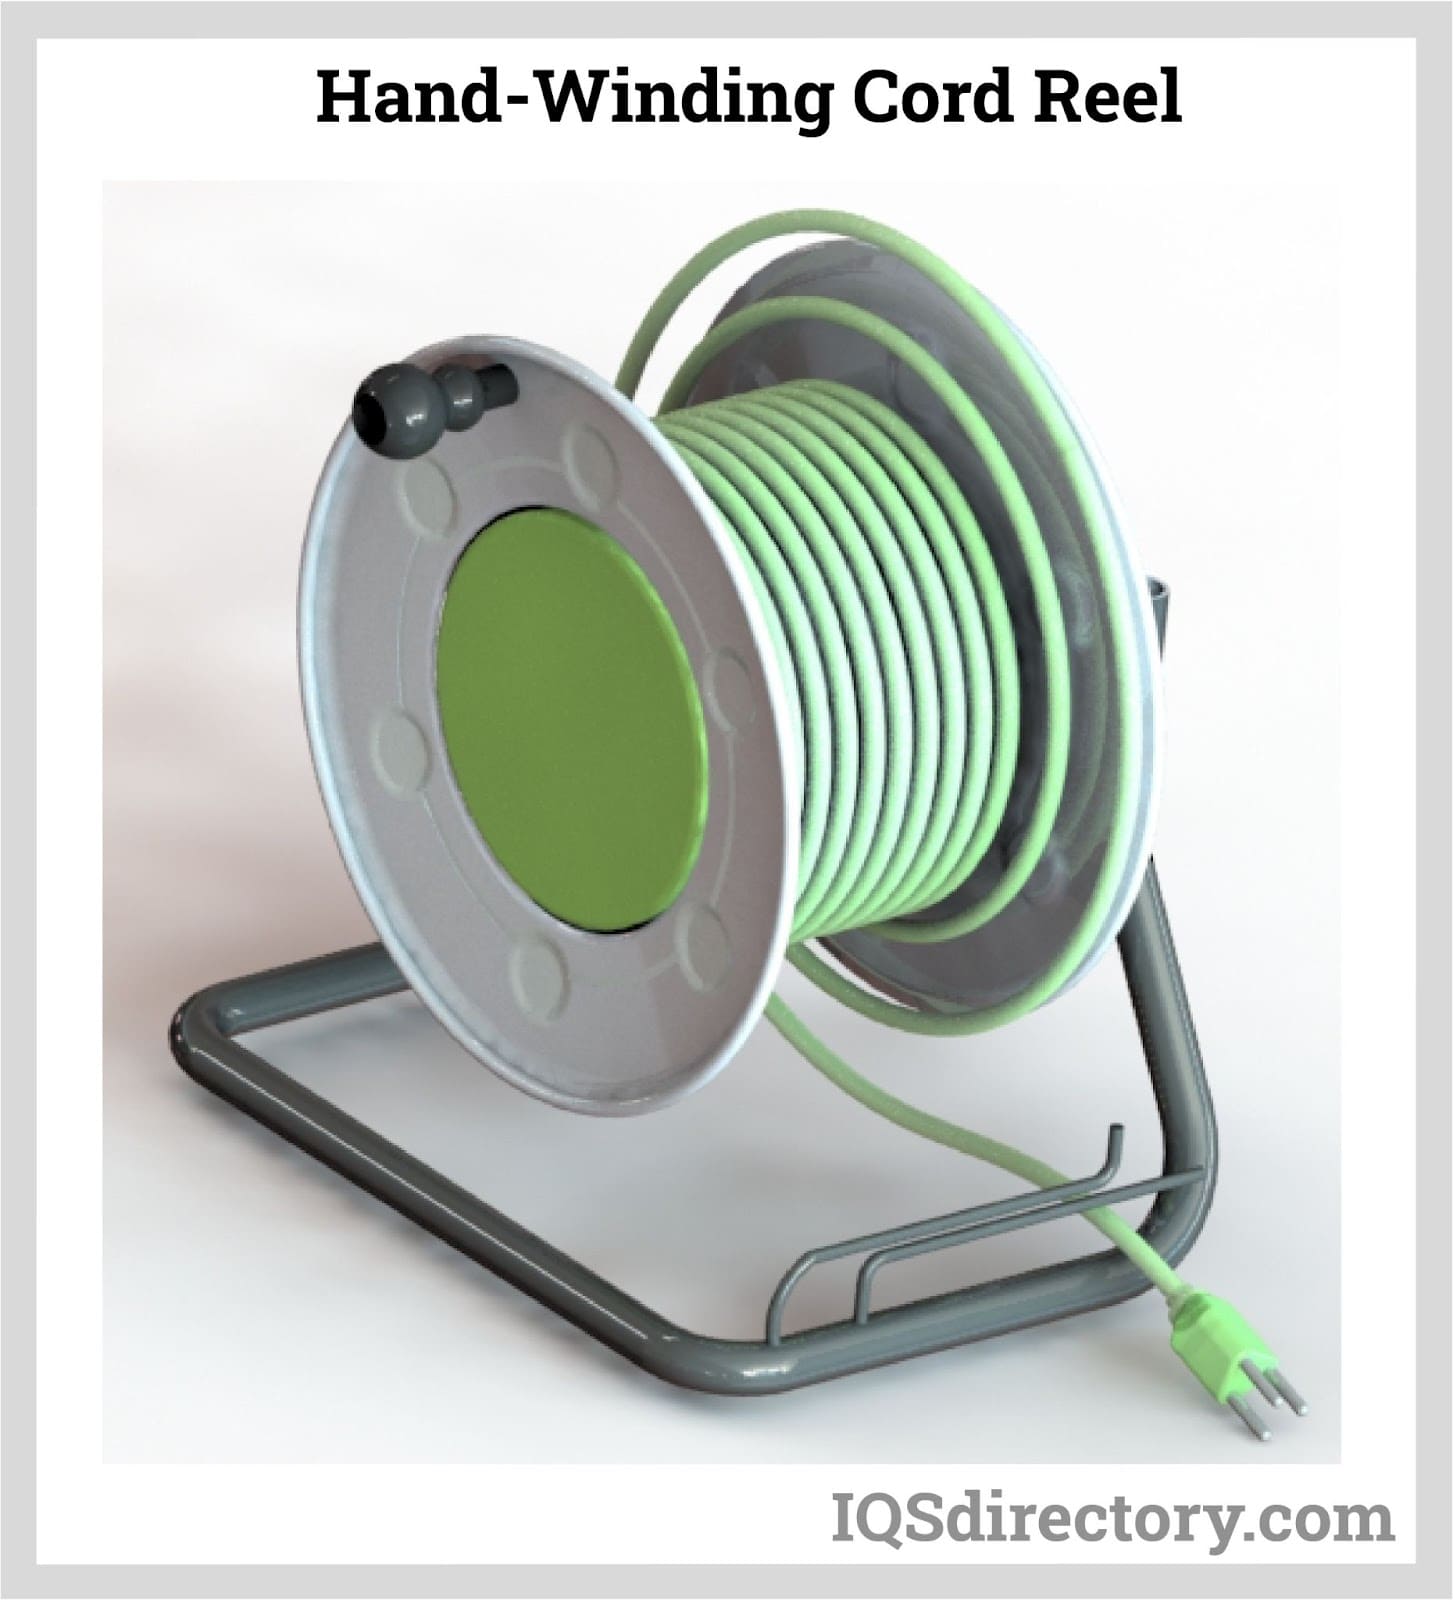 Are there any good wall-mounted *manual* extension cord reels? : r/Tools